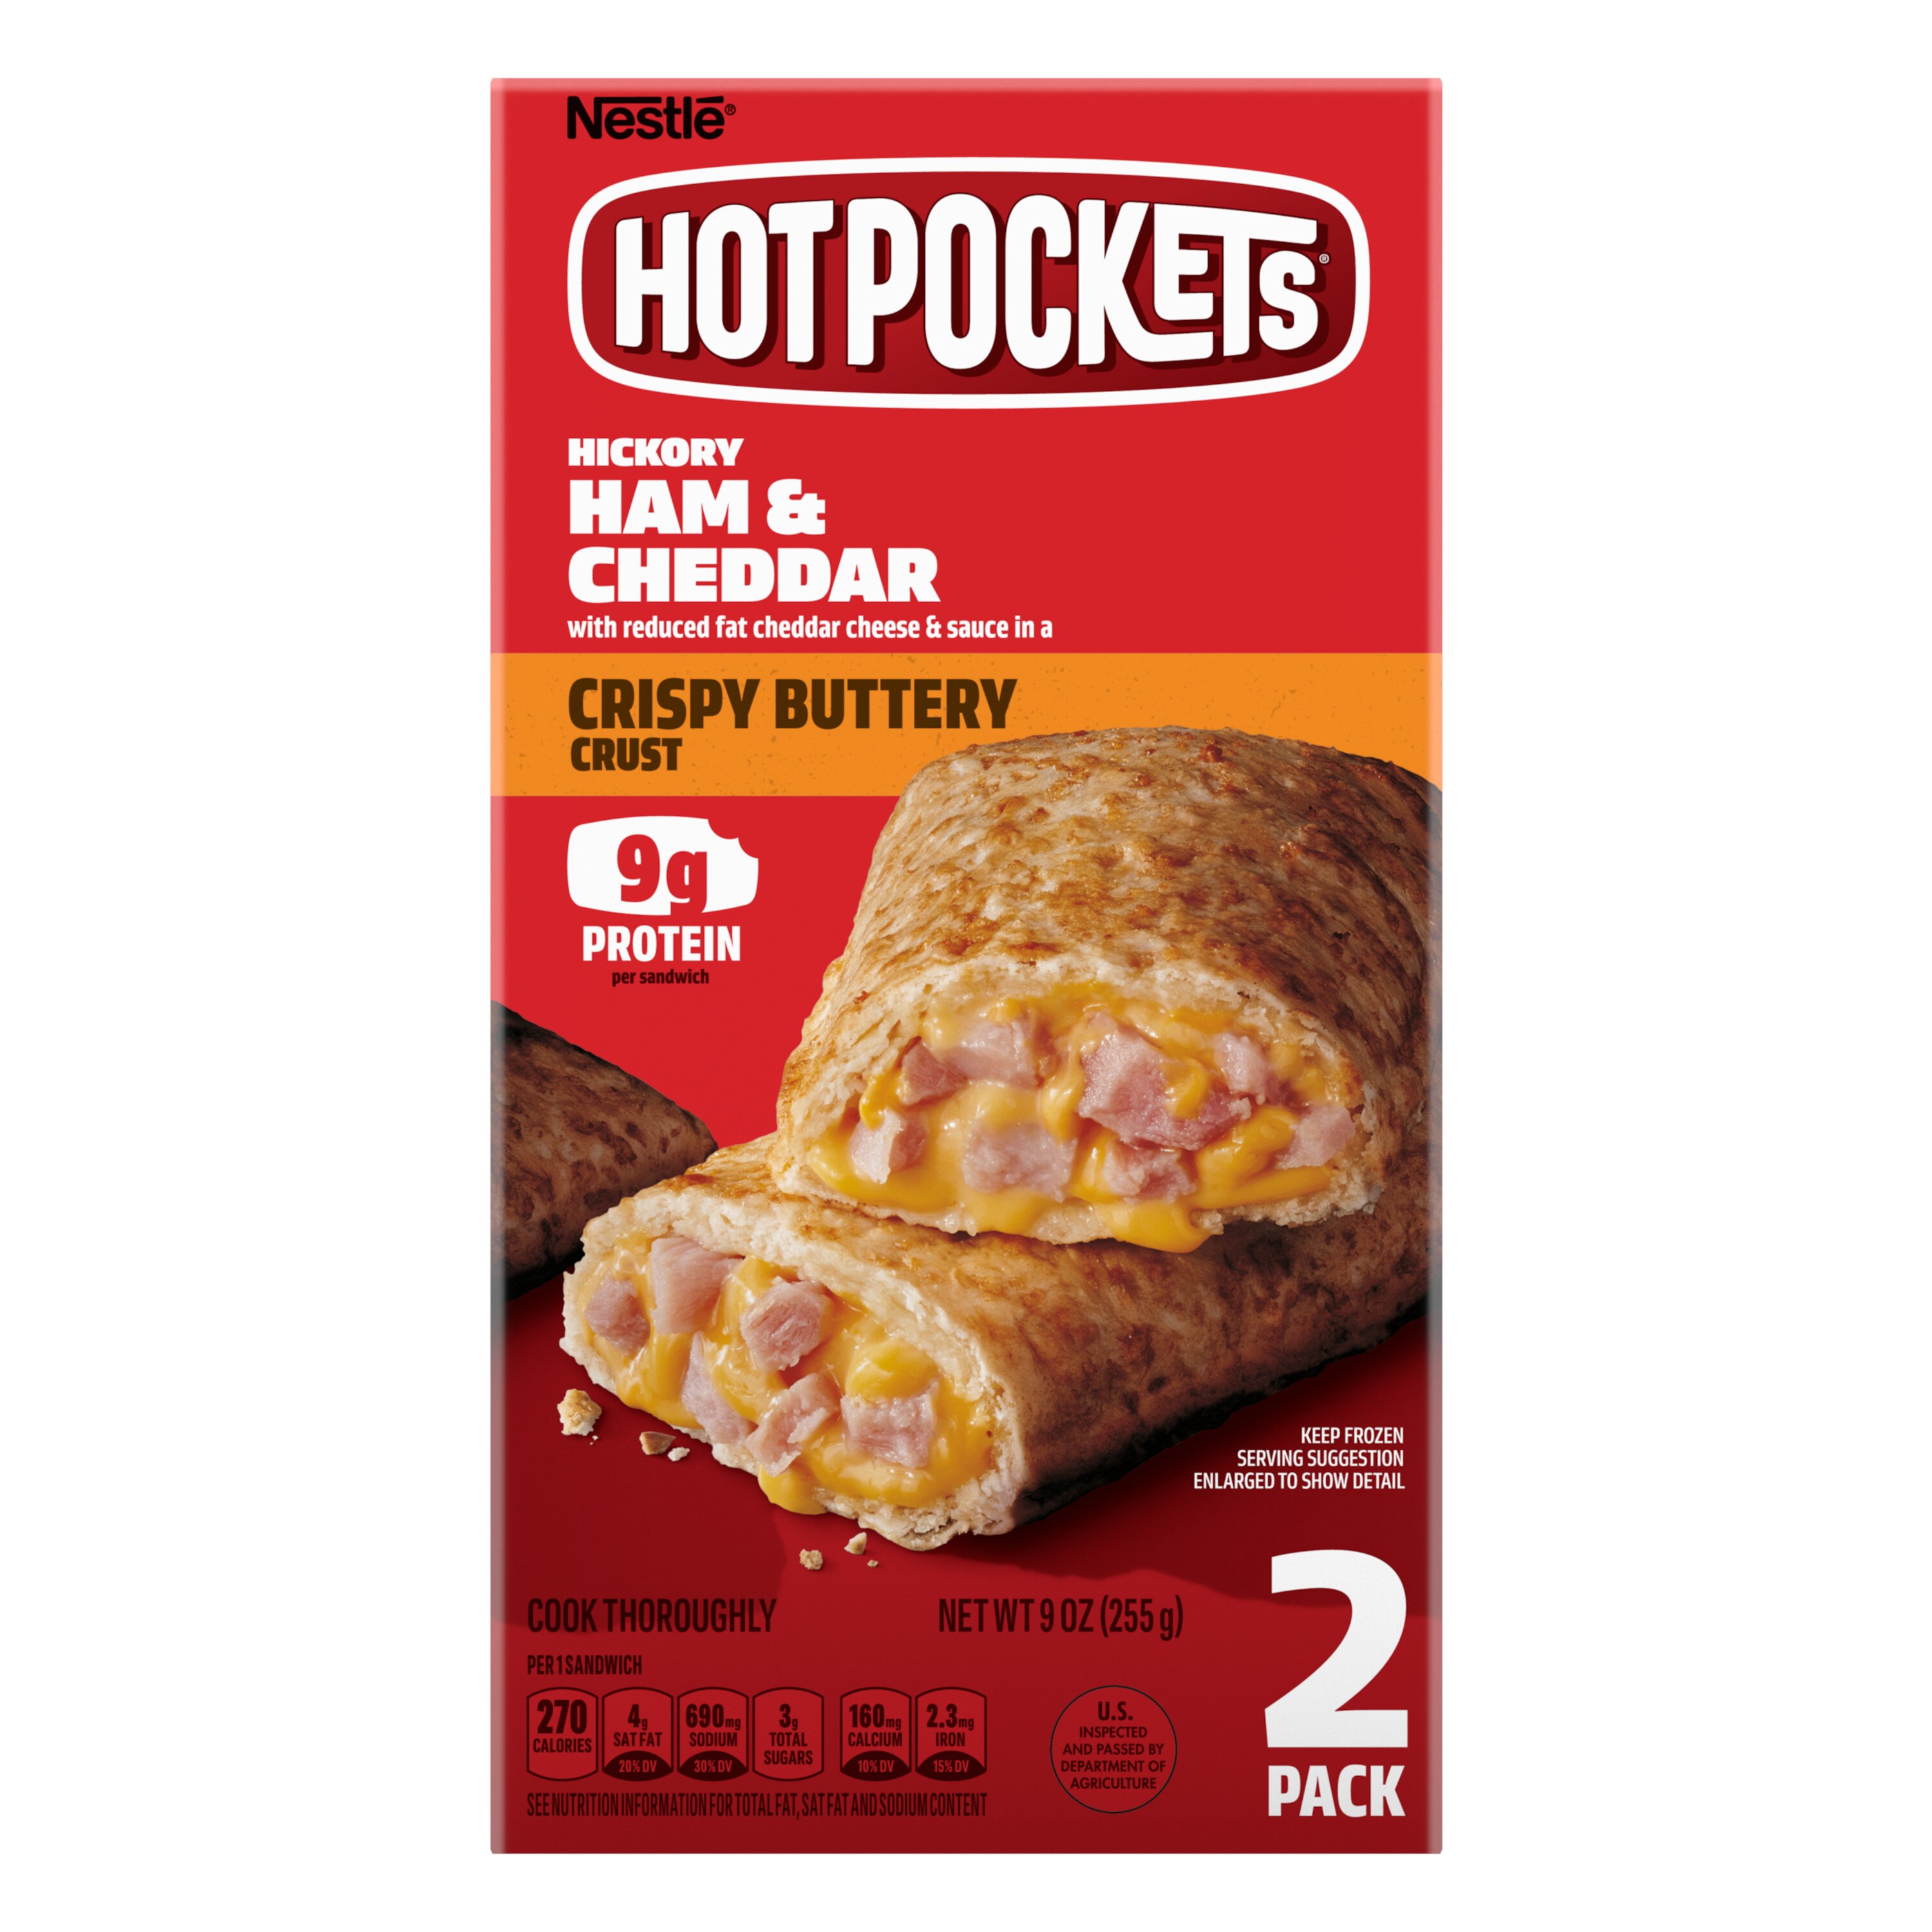 Hot Pockets Hickory Ham and Cheddar Frozen Sandwiches, 2 Pack